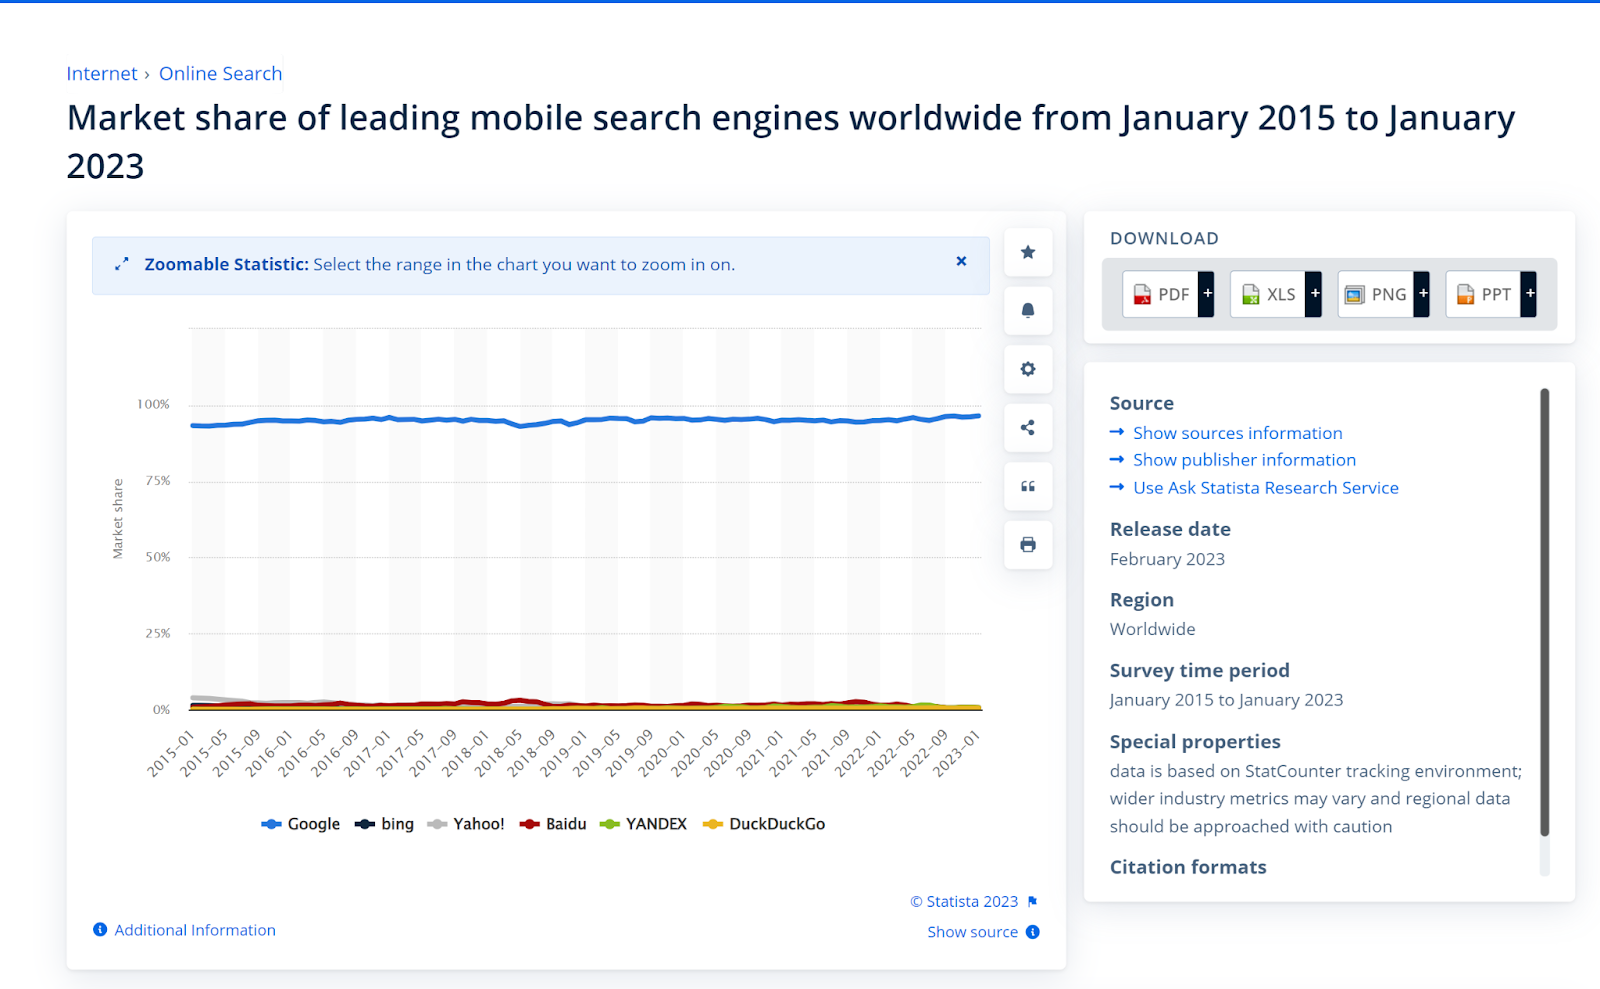 A screenshot from Statista showing the market share of leading mobile search engines worldwide from January 2015 to January 2023.